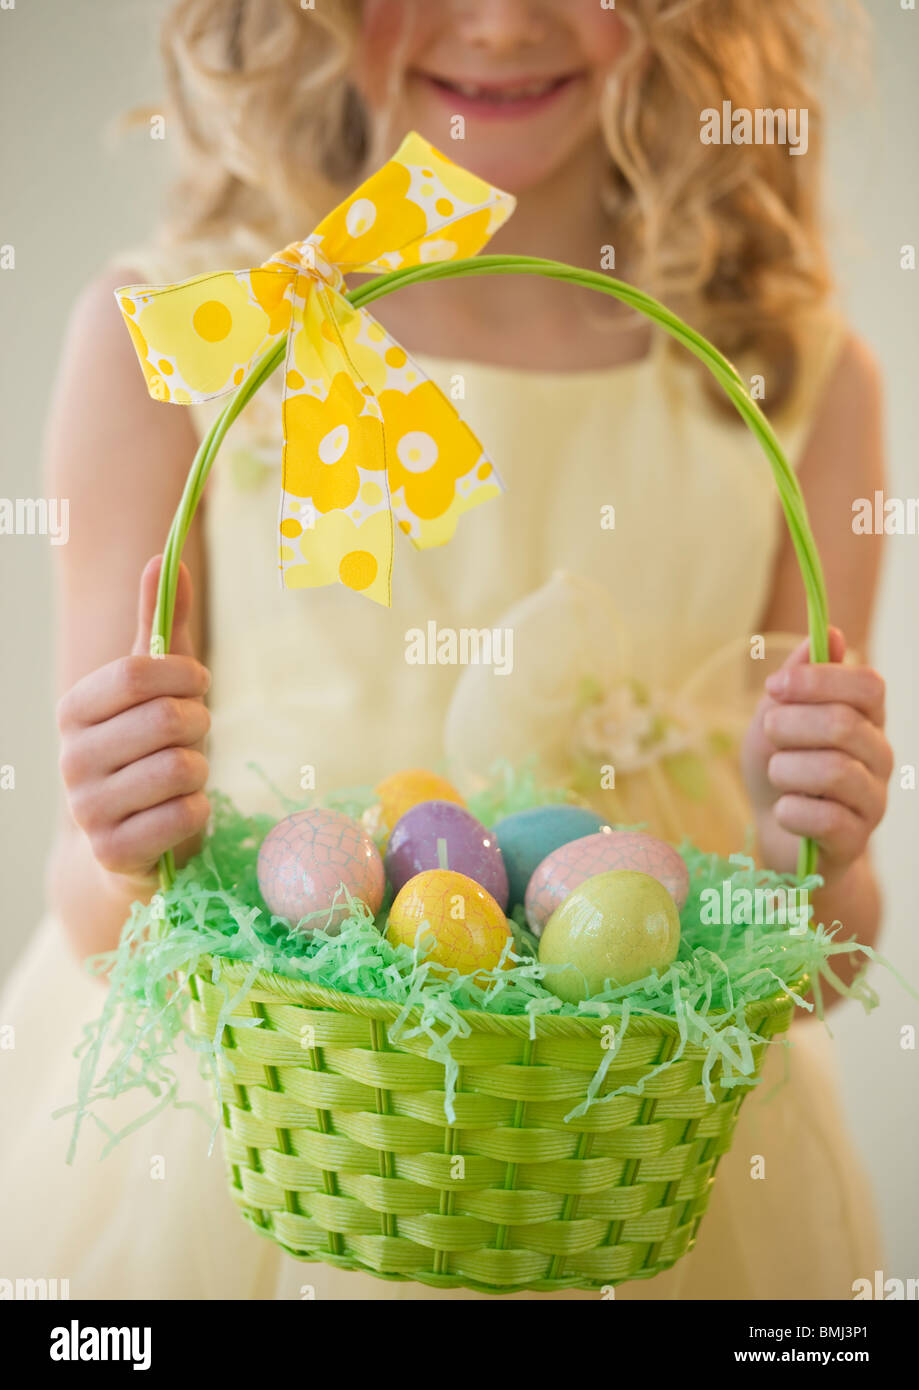 Young girl holding a basket of Easter eggs Stock Photo